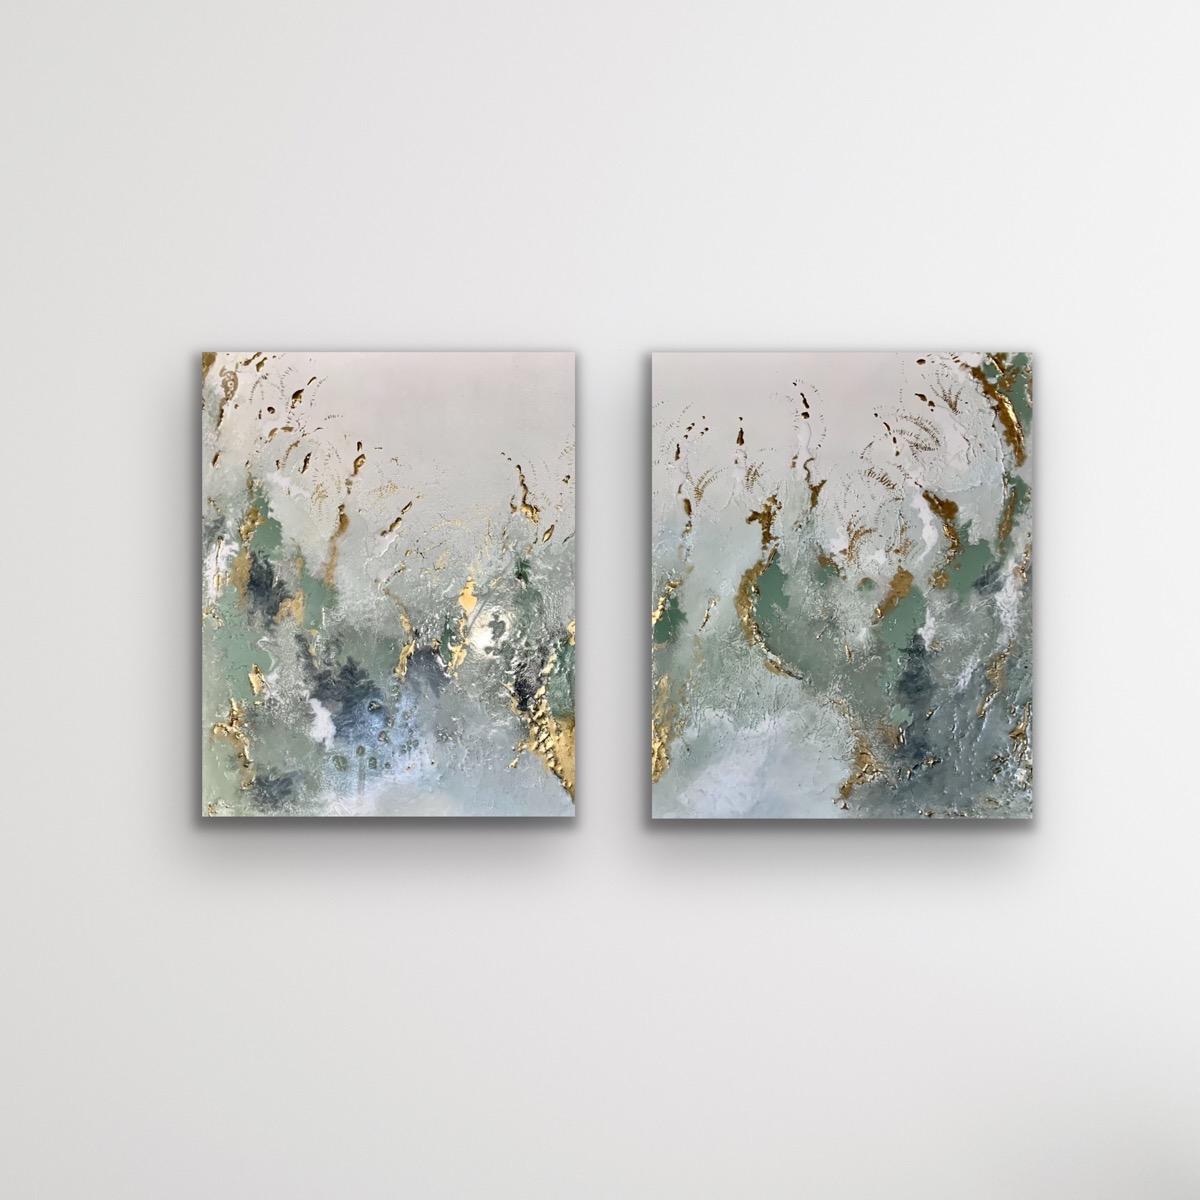 An Ode To Spring, Bold Abstract Seasonal Painting, Original Statement Diptych - Black Abstract Painting by Sarah Berger